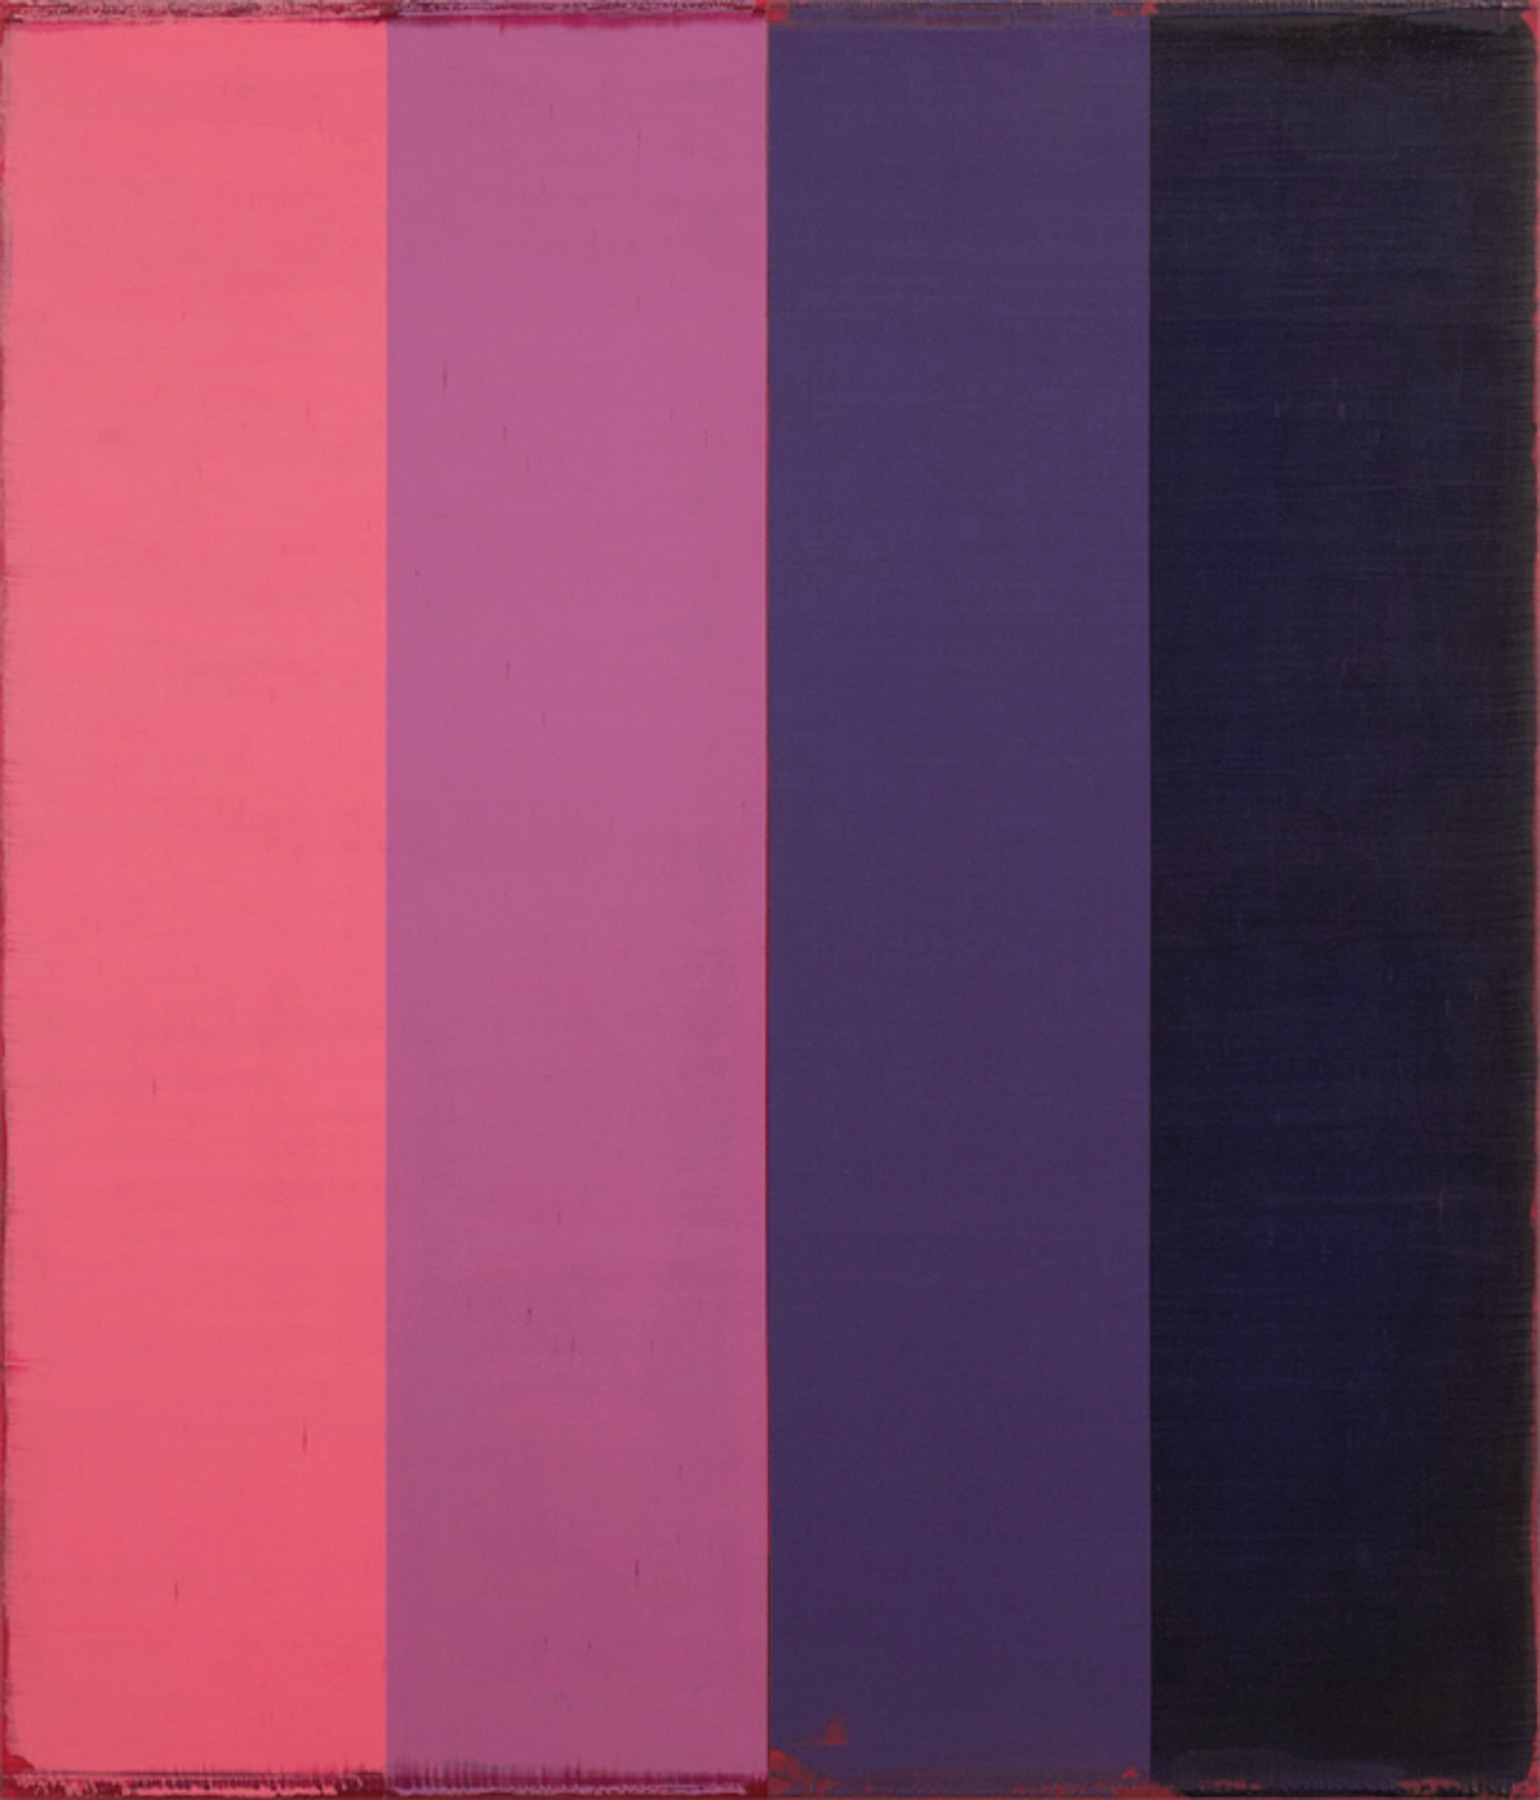 Steven Alexander, Arcade 8, 2018, Oil and acrylic on linen, 42 x 36 inches, Signed and titled on the verso, Vertical rectangles in pink, lilac, purple and navy blue, Steven Alexander is an American artist who makes abstract paintings characterized by luminous color, sensuous surfaces and iconic configurations.